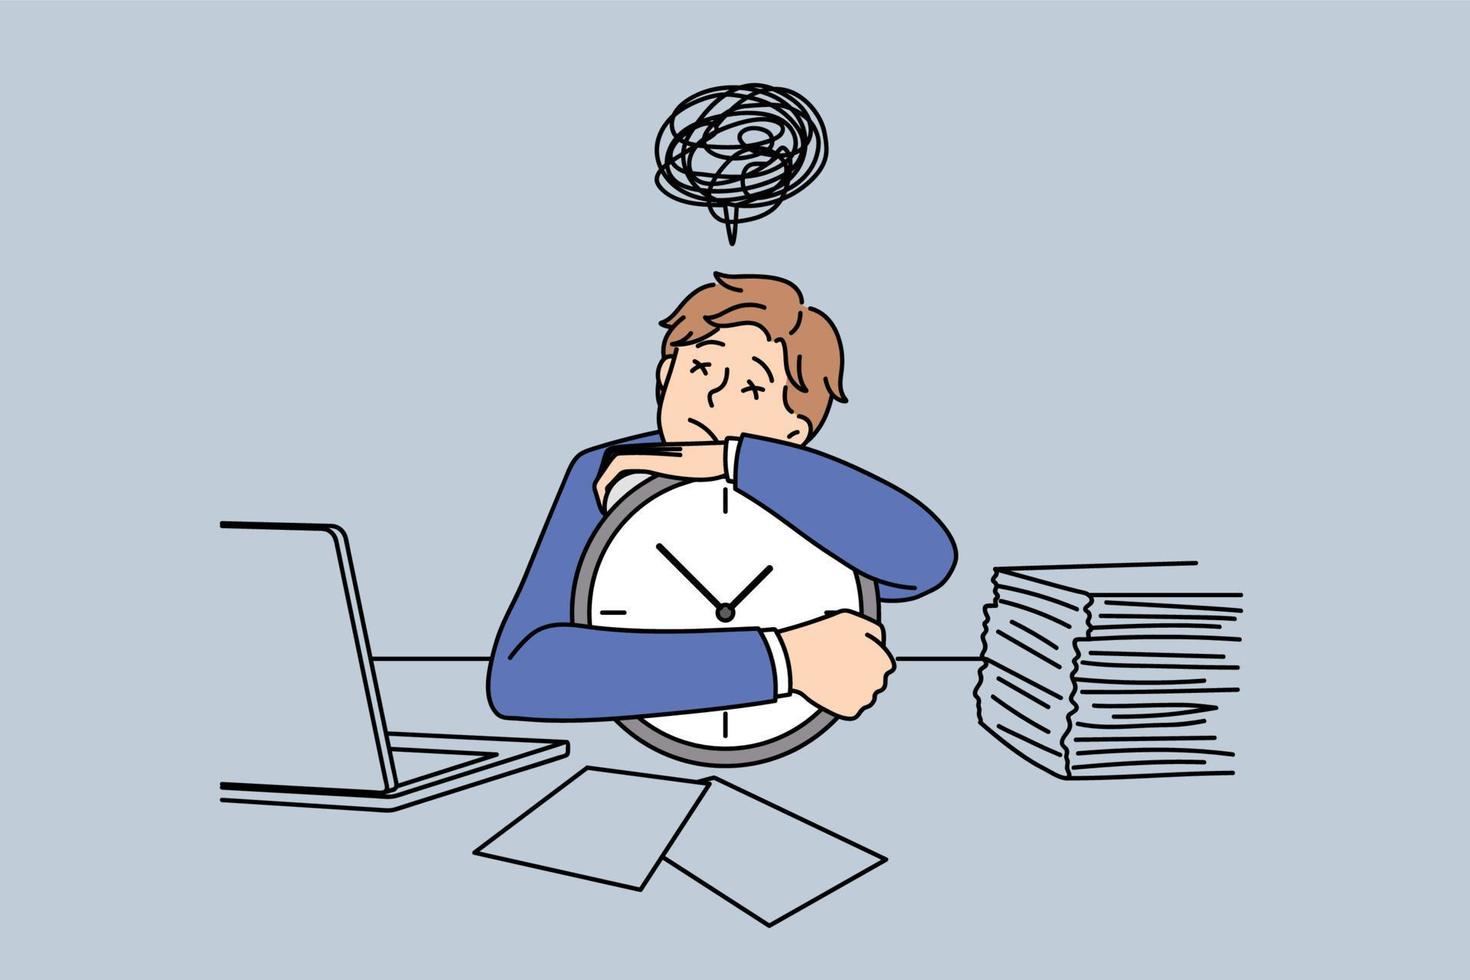 Sleepy worker and tiredness concept. Young man office worker sitting at laptop and papers embracing clock feeling sleepy having dreams sleeping vector illustration